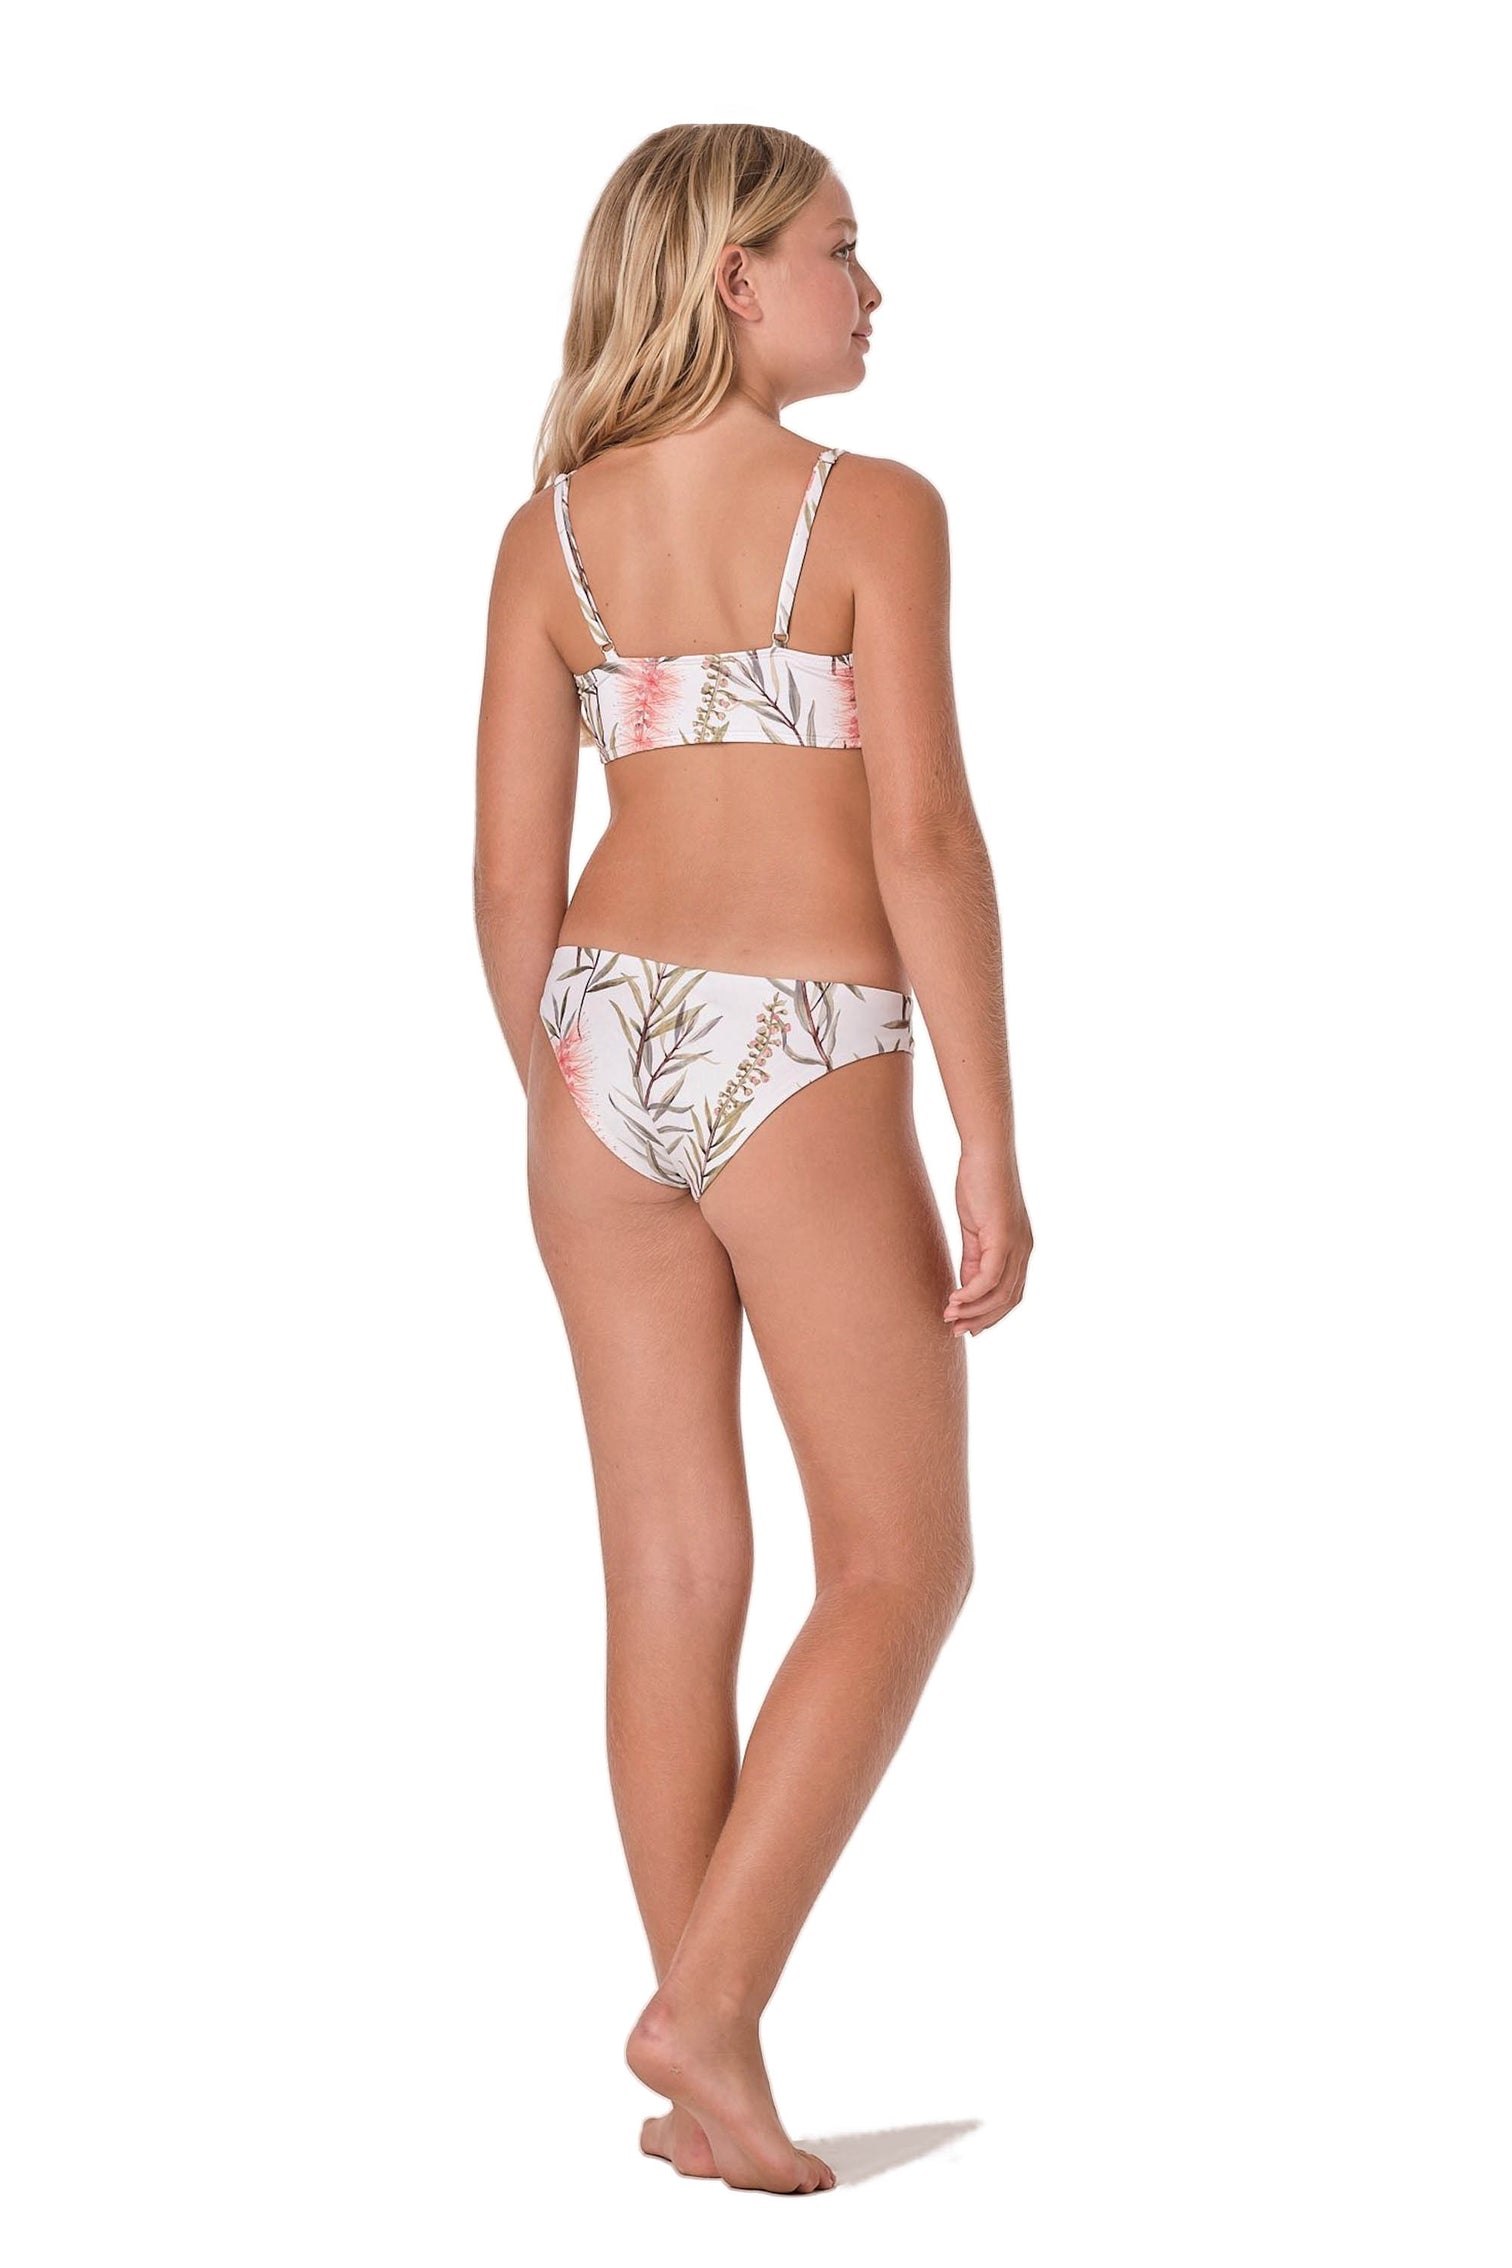 Model image of bikini set. Design is white with floral/paradise look.